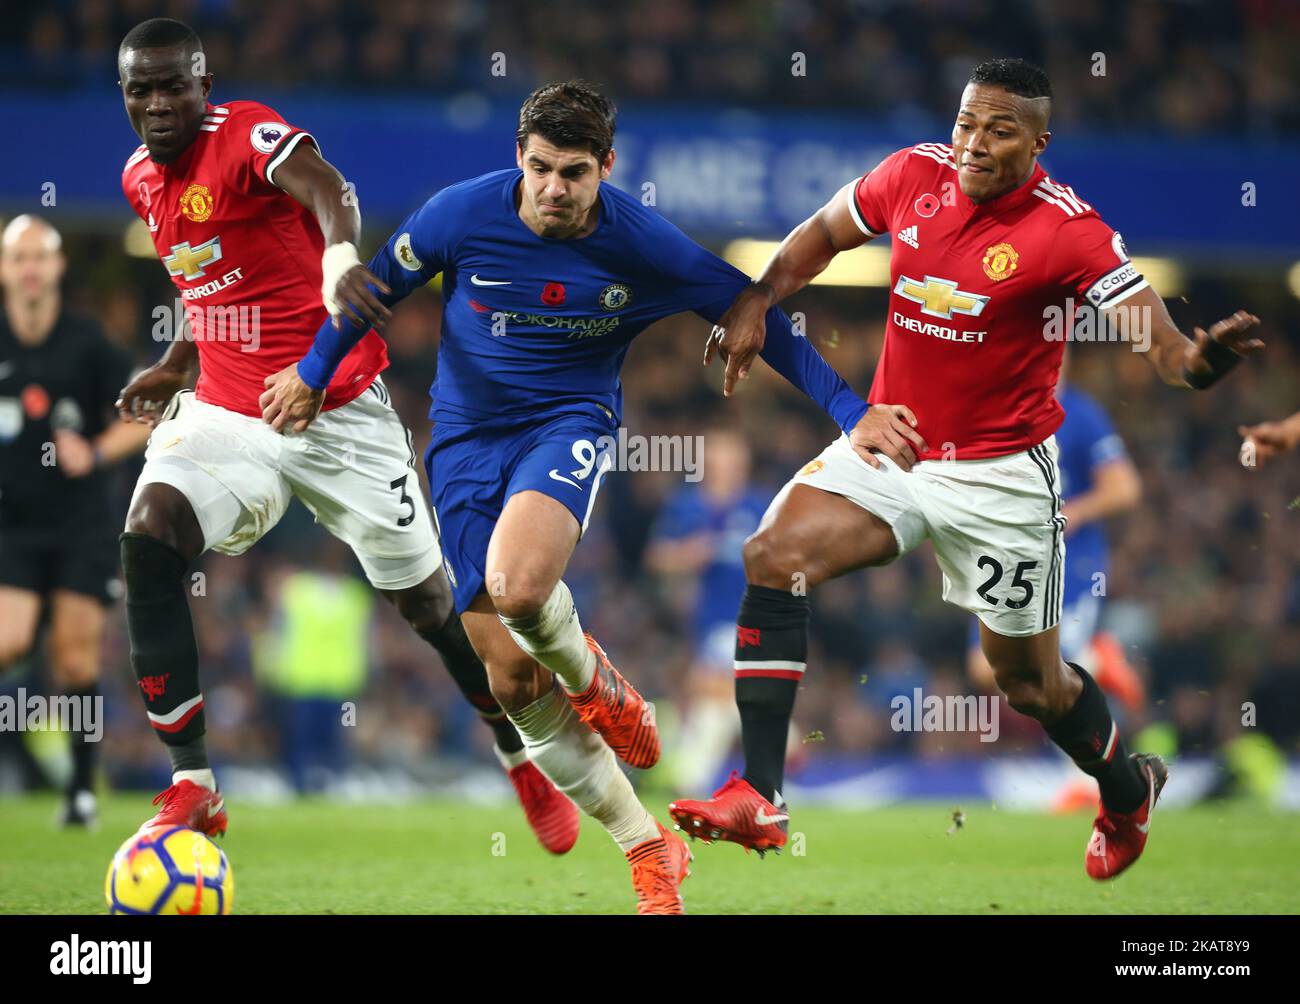 L-R Manchester United's Eric Bailly, Chelsea's Alvaro Morata and Manchester United's Luis Antonio Valencia during the Premier League match between Chelsea and Manchester United at Stamford Bridge in London, England on November 5, 2017. (Photo by Kieran Galvin/NurPhoto)  Stock Photo